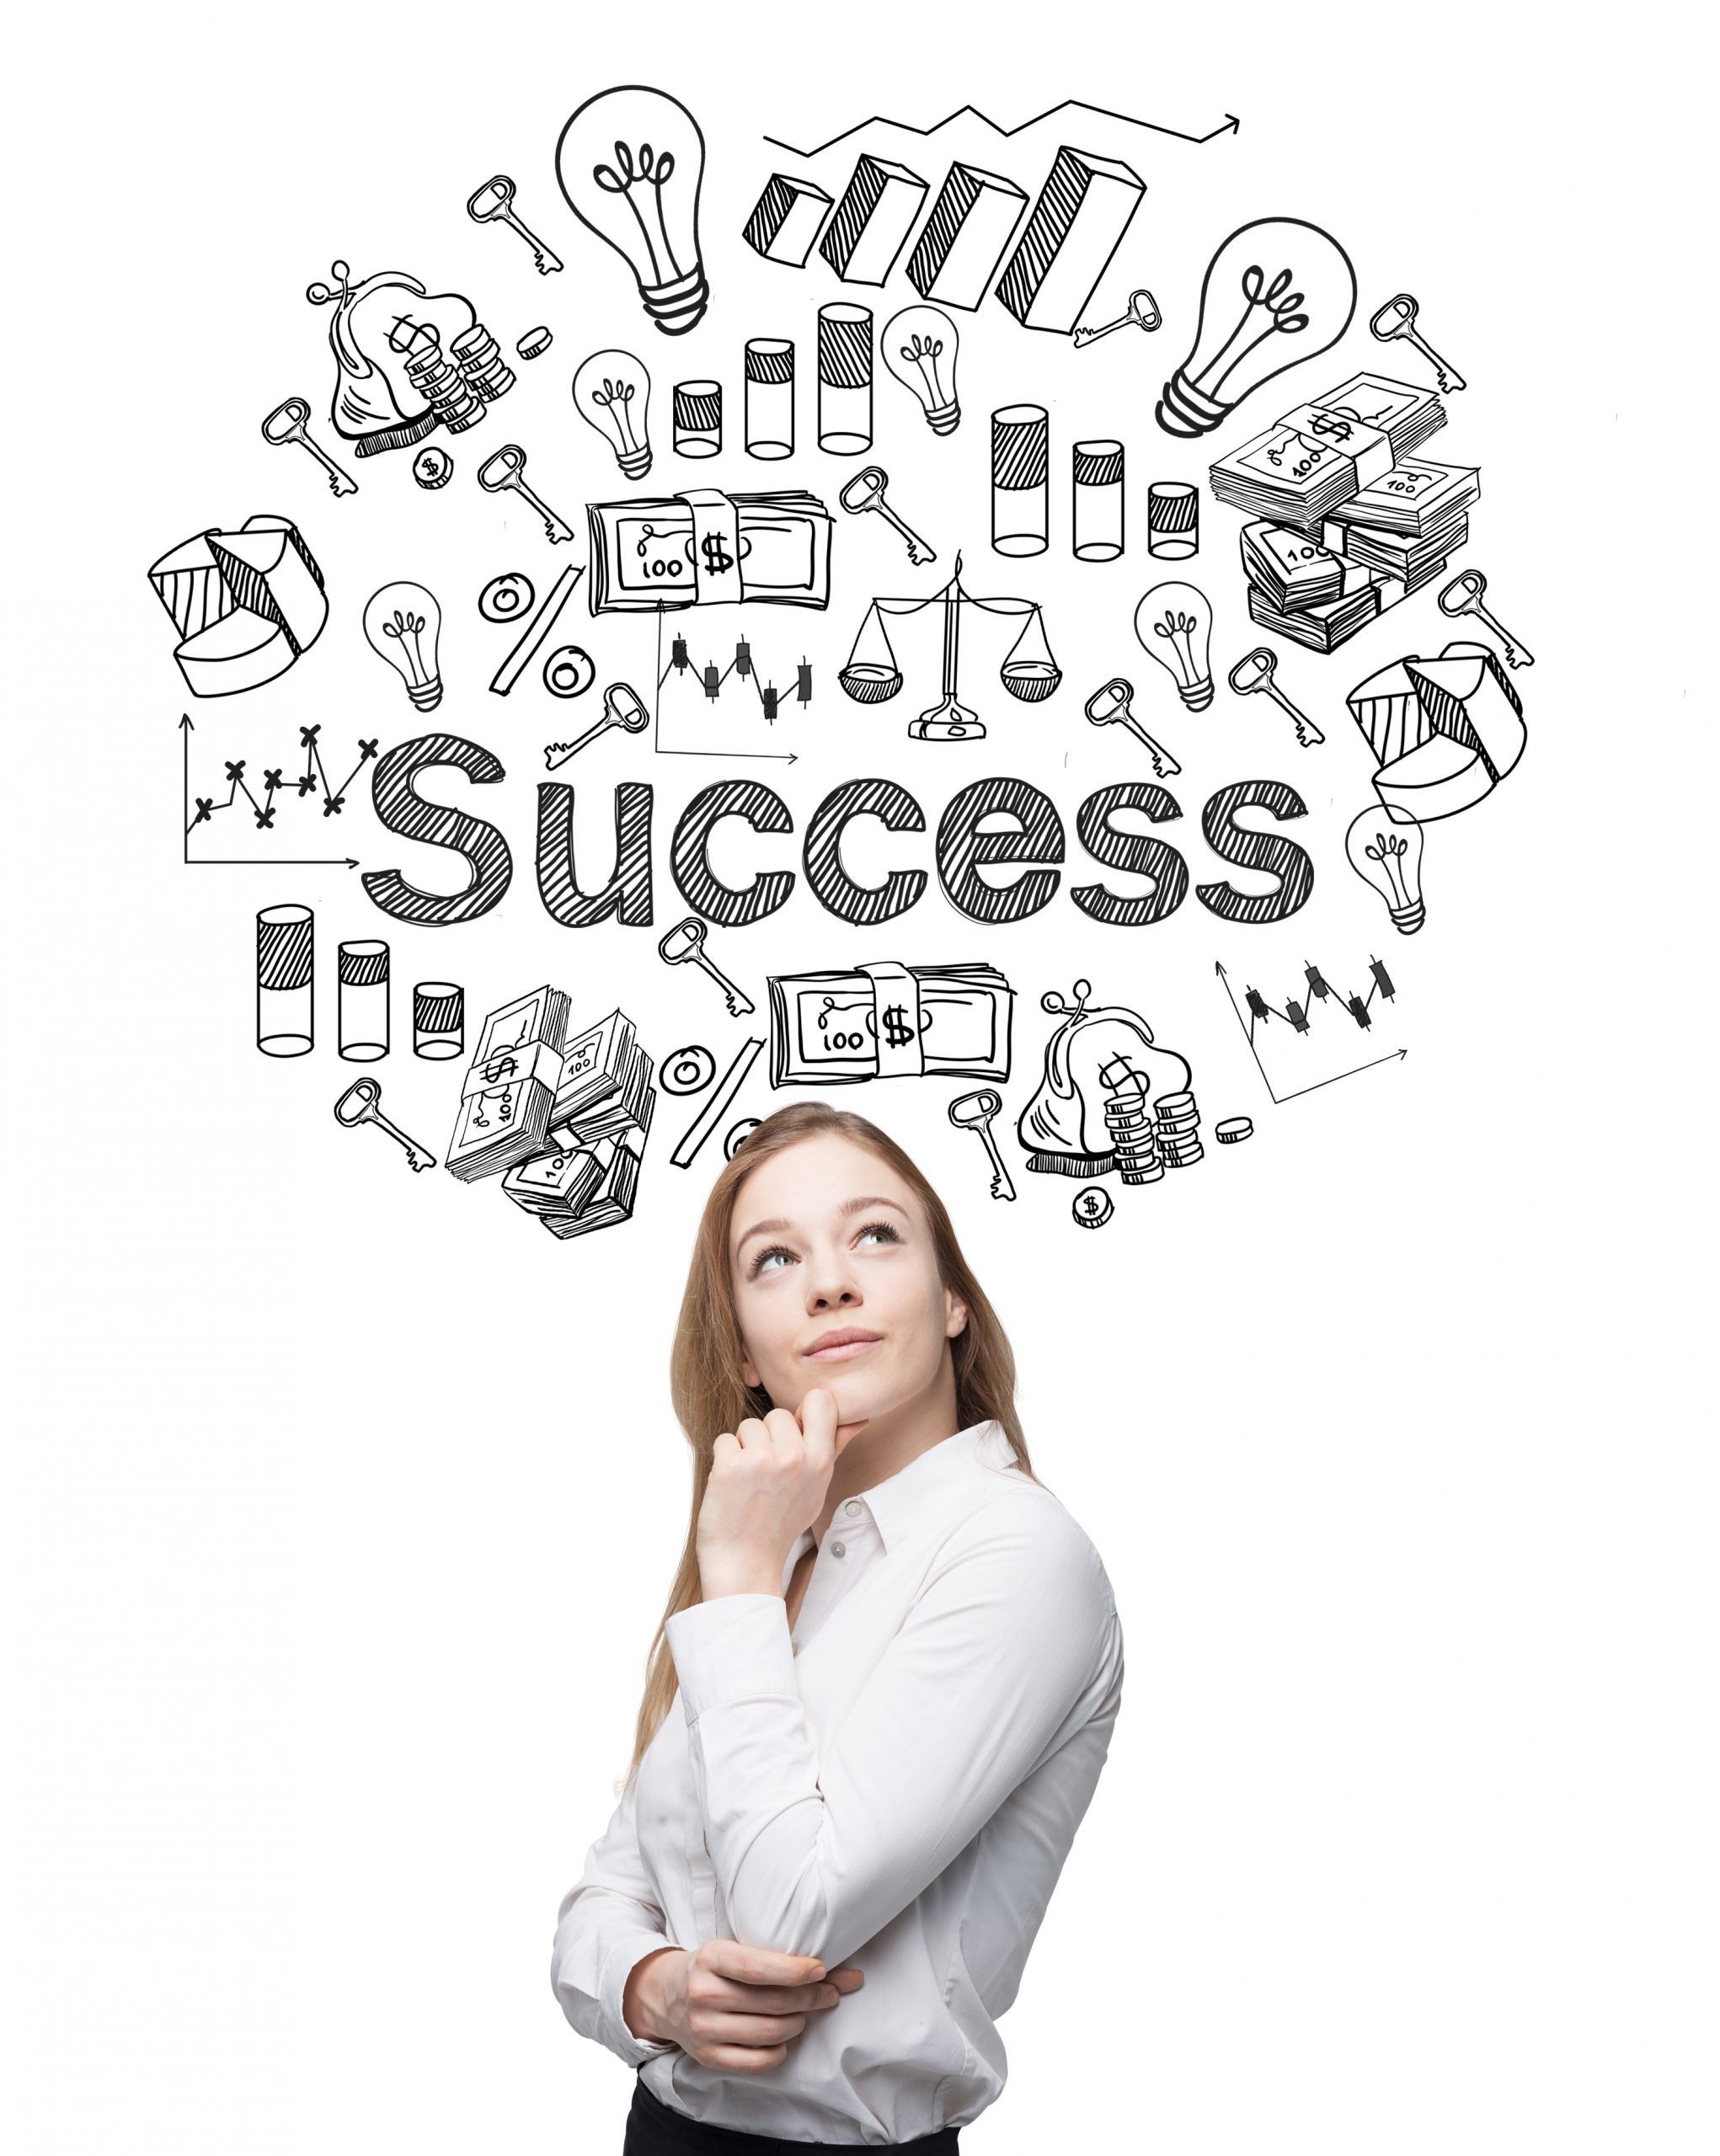 A young woman looking up and standing in front of a conrete wall with many different business icons and the word 'success' drawn on it. Concept of successful business development.